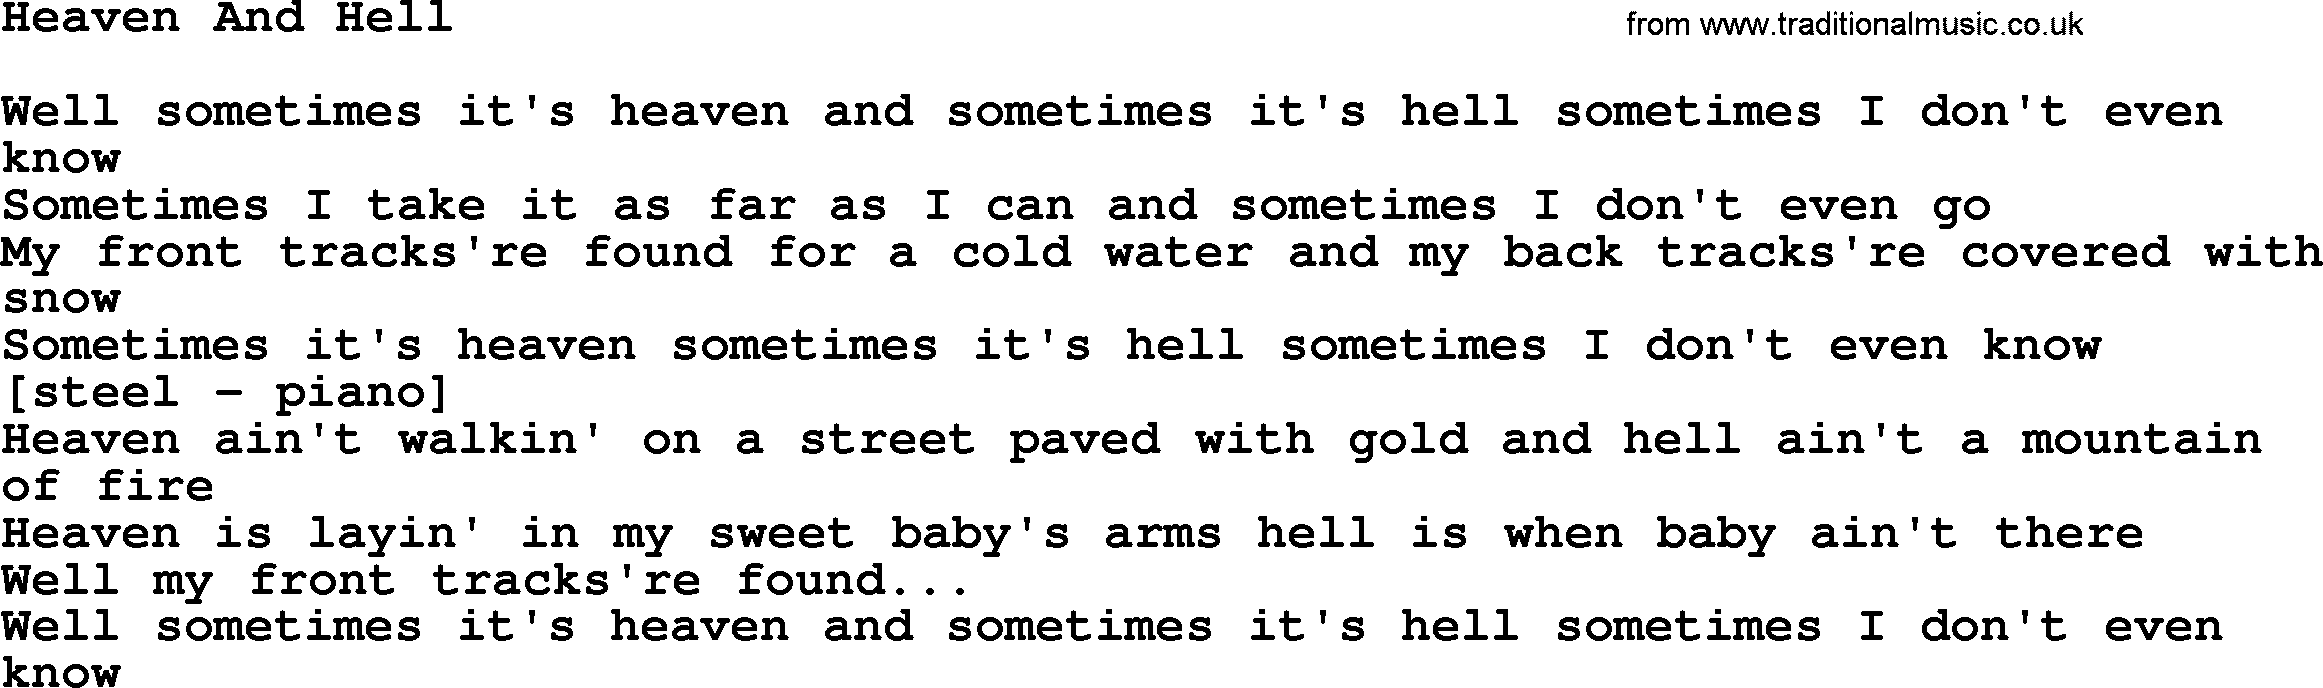 Willie Nelson song: Heaven And Hell lyrics